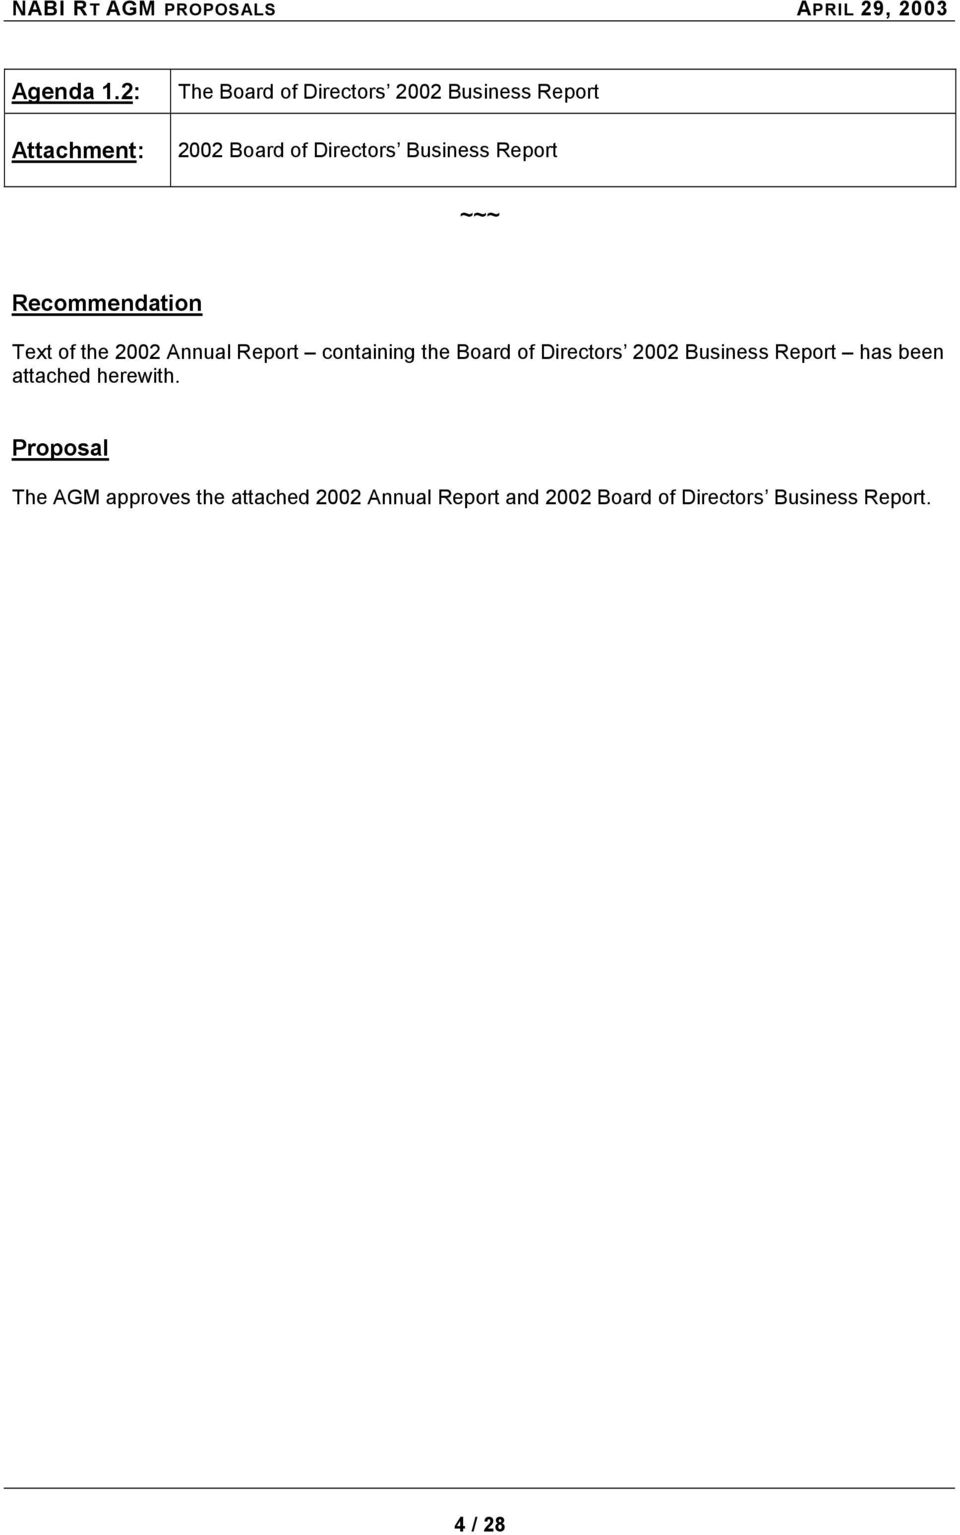 Report ~~~ Recommendation Text of the 2002 Annual Report containing the Board of Directors 2002